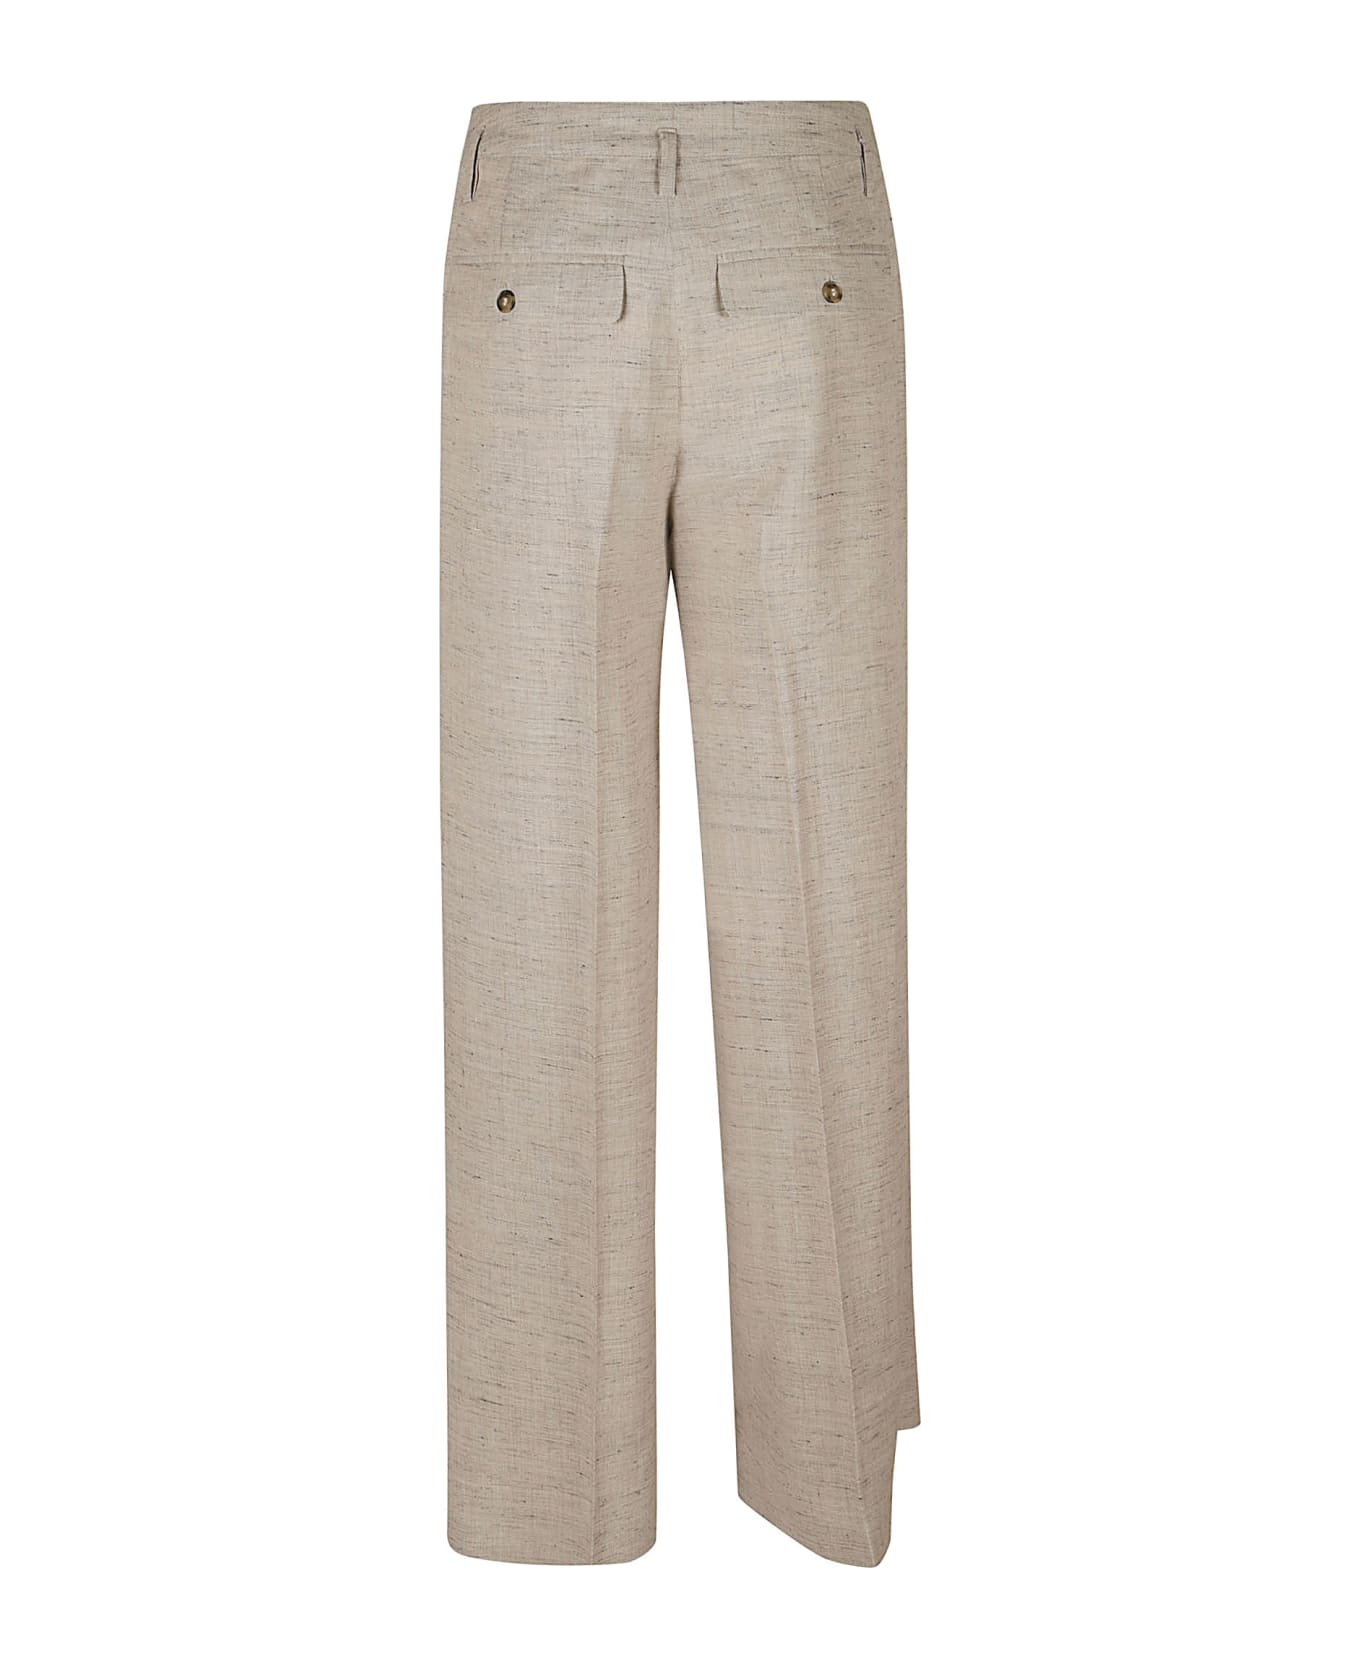 Herskind Pleat Detail Straight Leg Trousers - Sand ボトムス